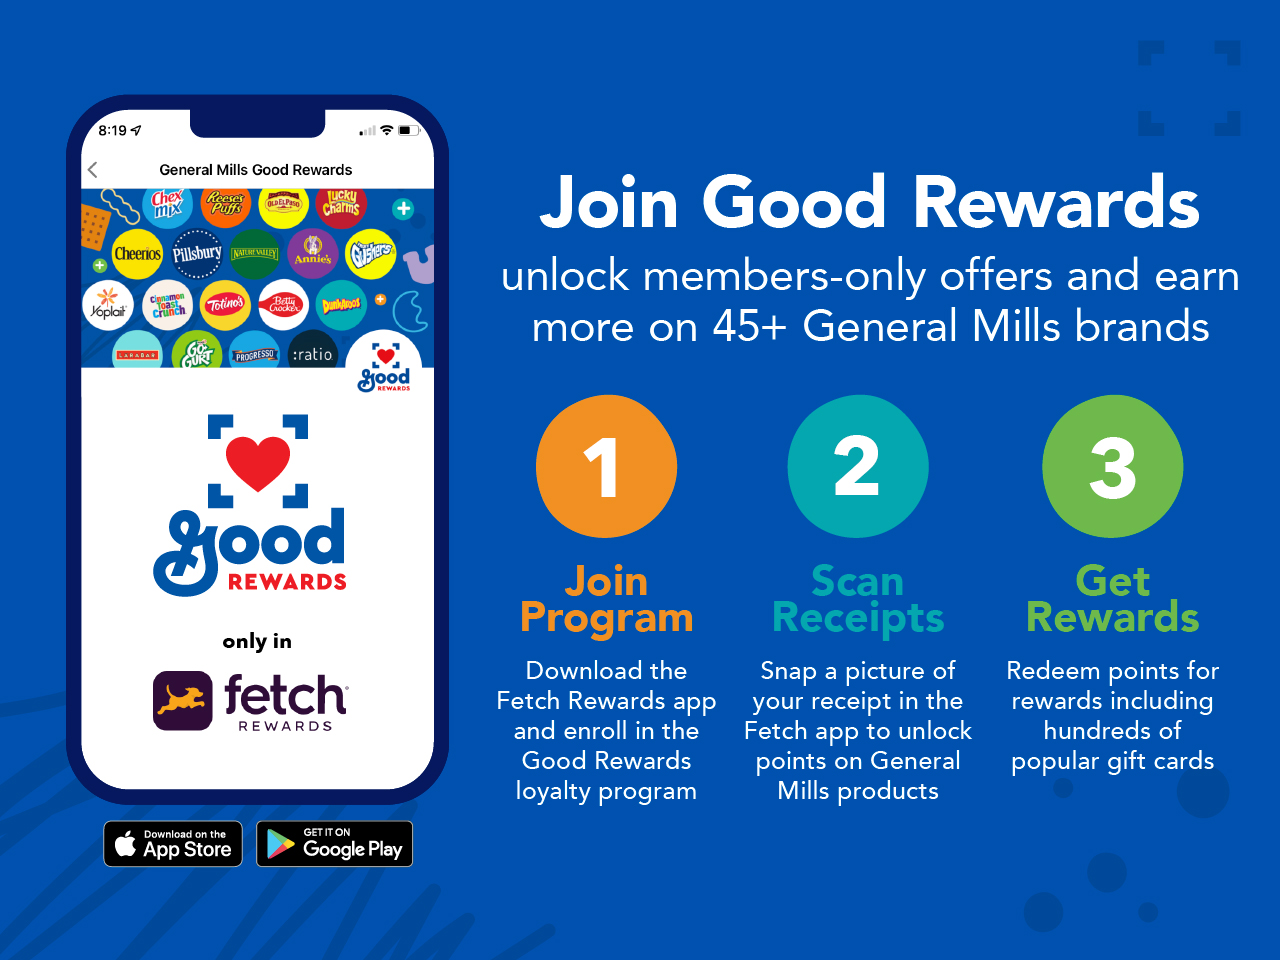 Steps to join Good Rewards